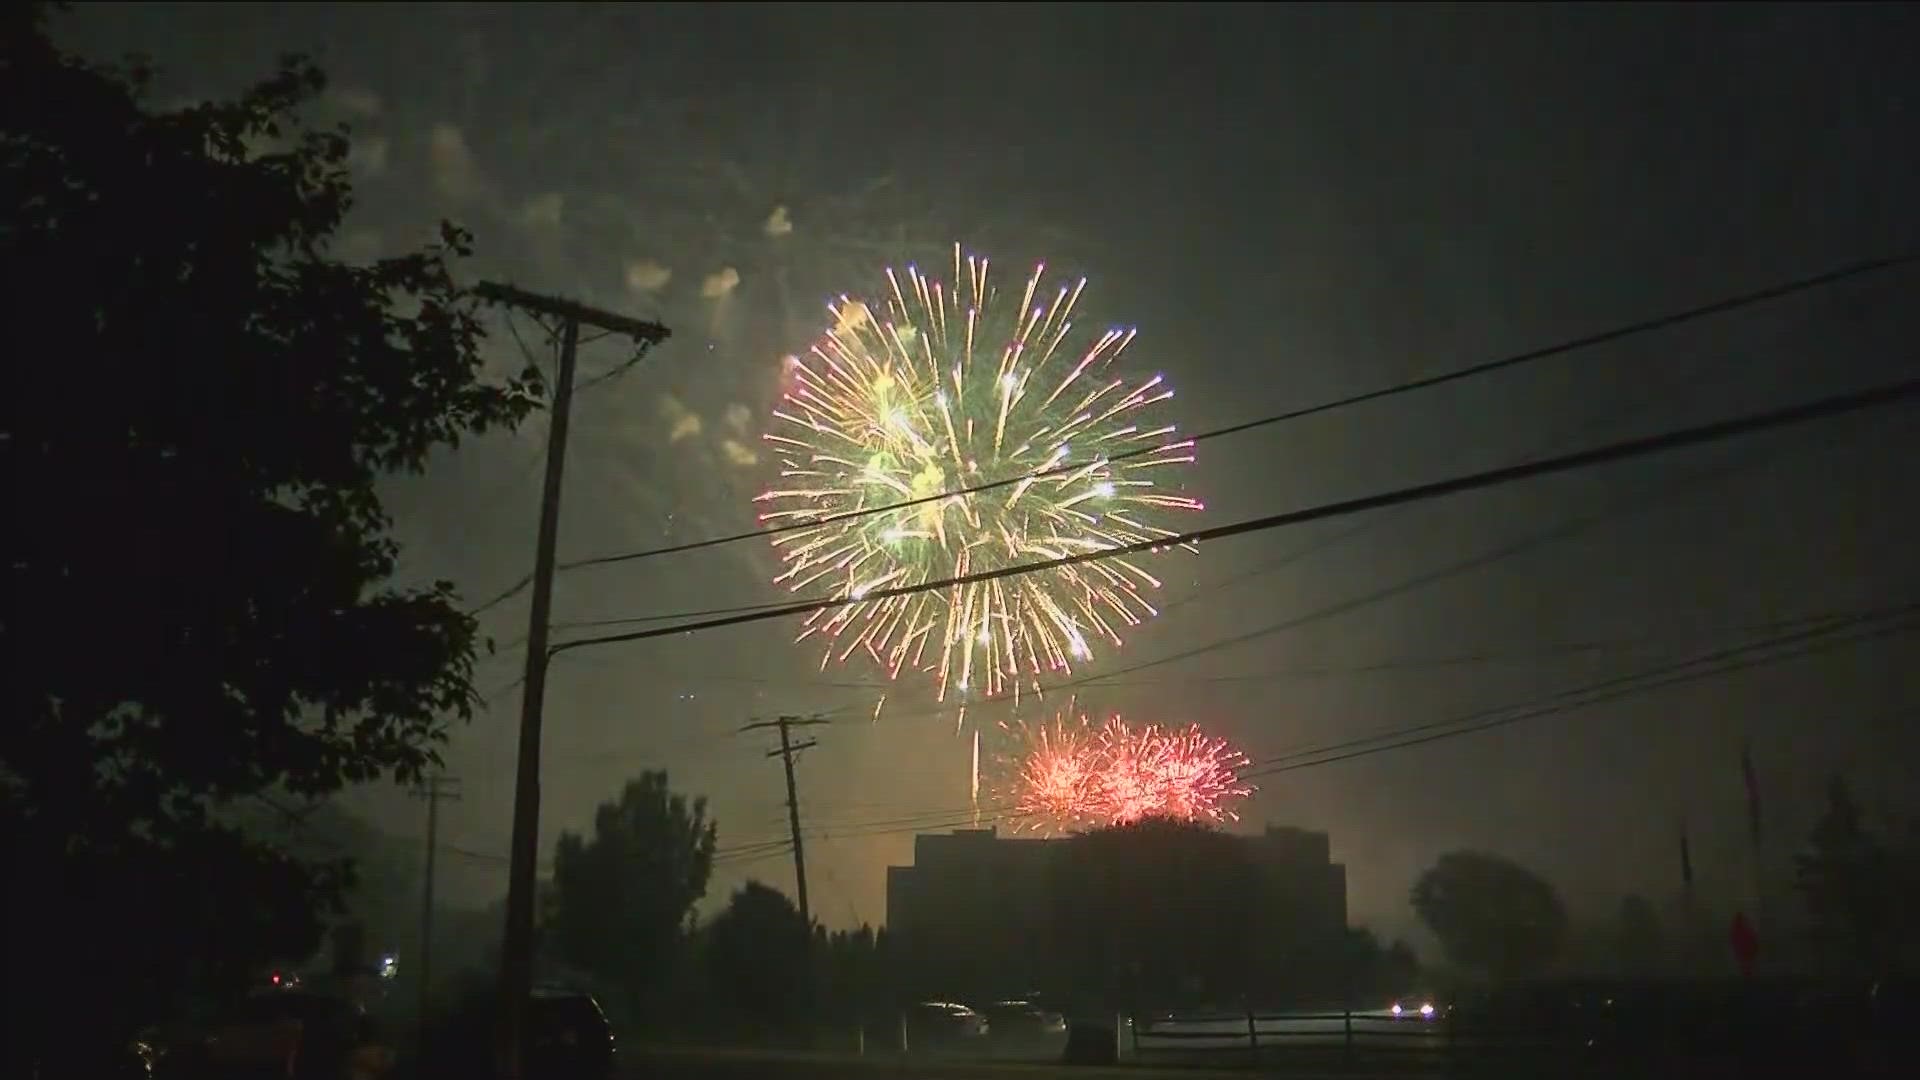 Patrons at participating restaurants have the chance to round up their bill to the nearest dollar to raise portions of the $14,000 needed for fireworks.